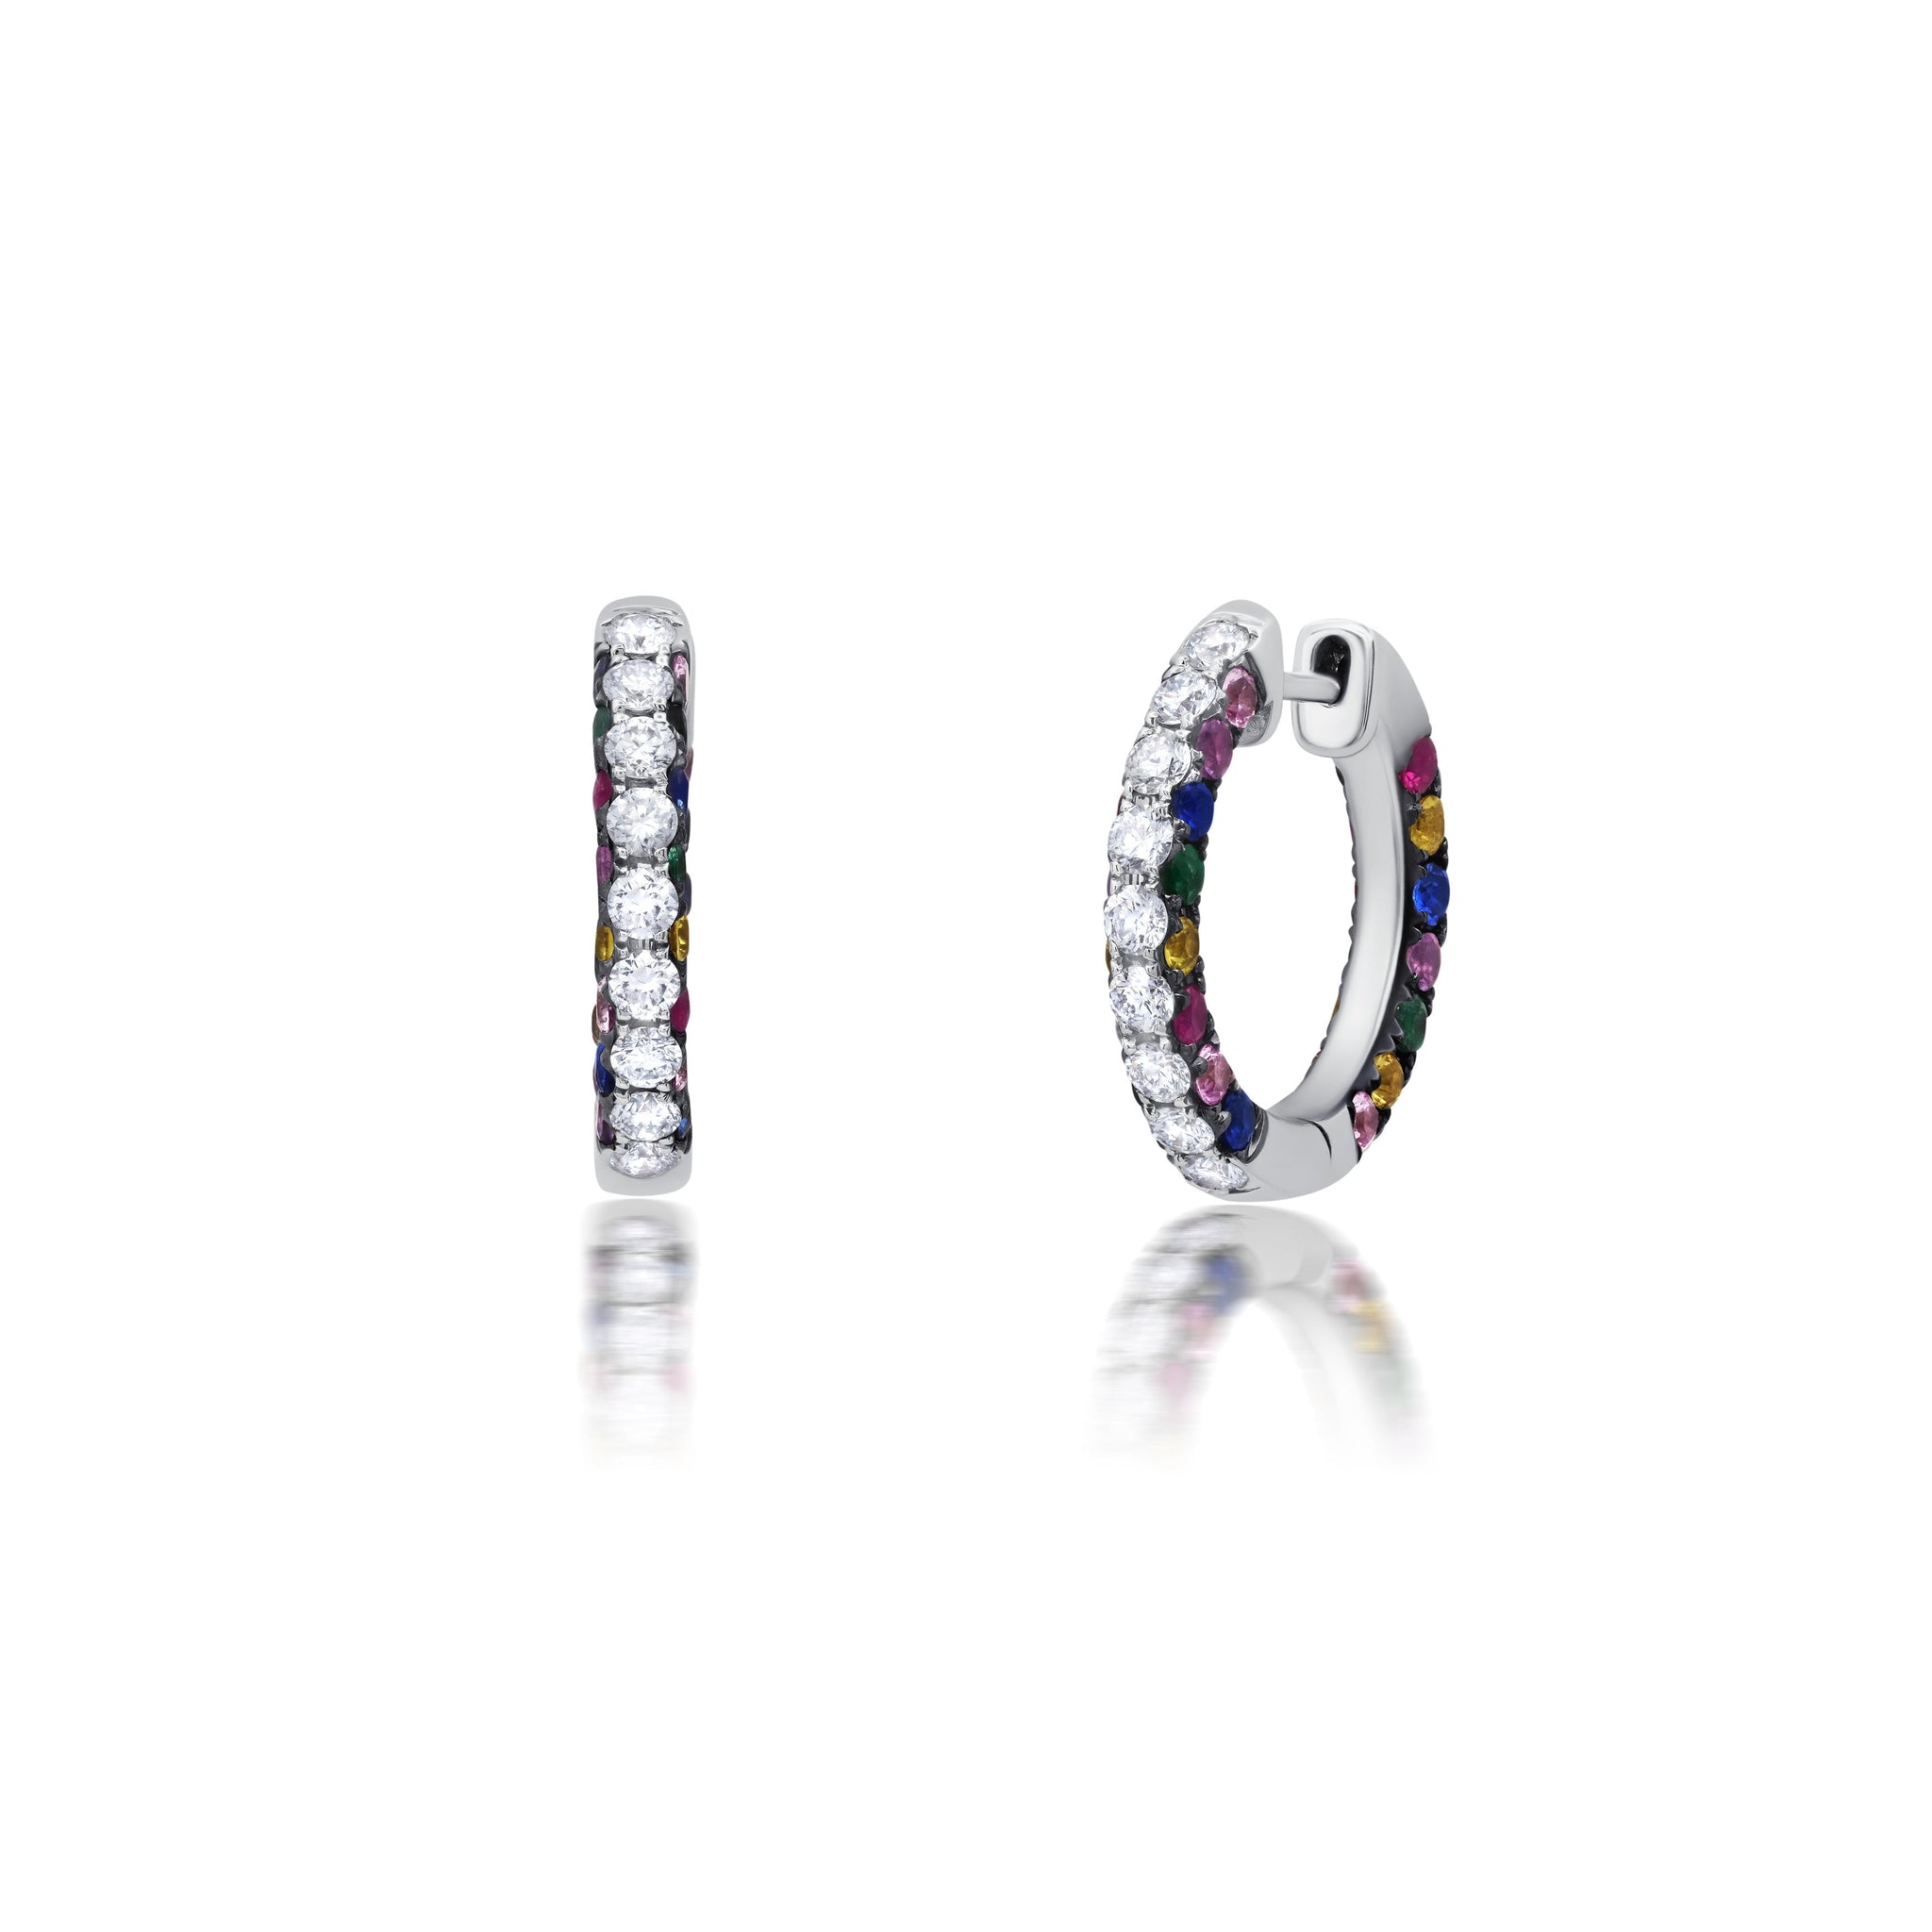 Graziela Gems - Multi Color Sapphire and Diamond 3 Sided Hoop Earrings - White Gold